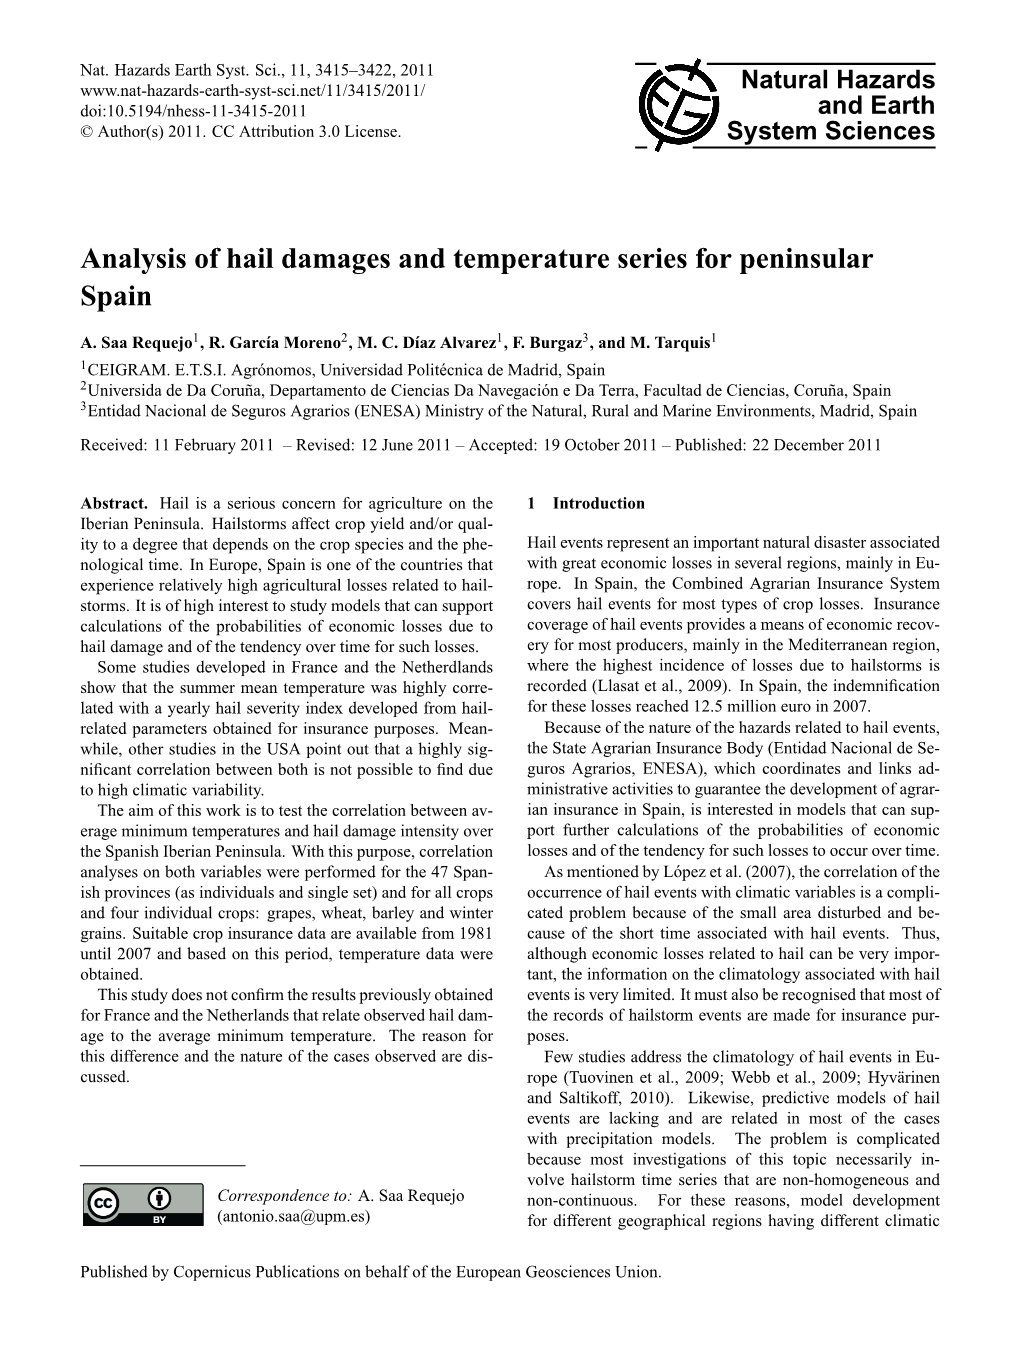 Analysis of Hail Damages and Temperature Series for Peninsular Spain